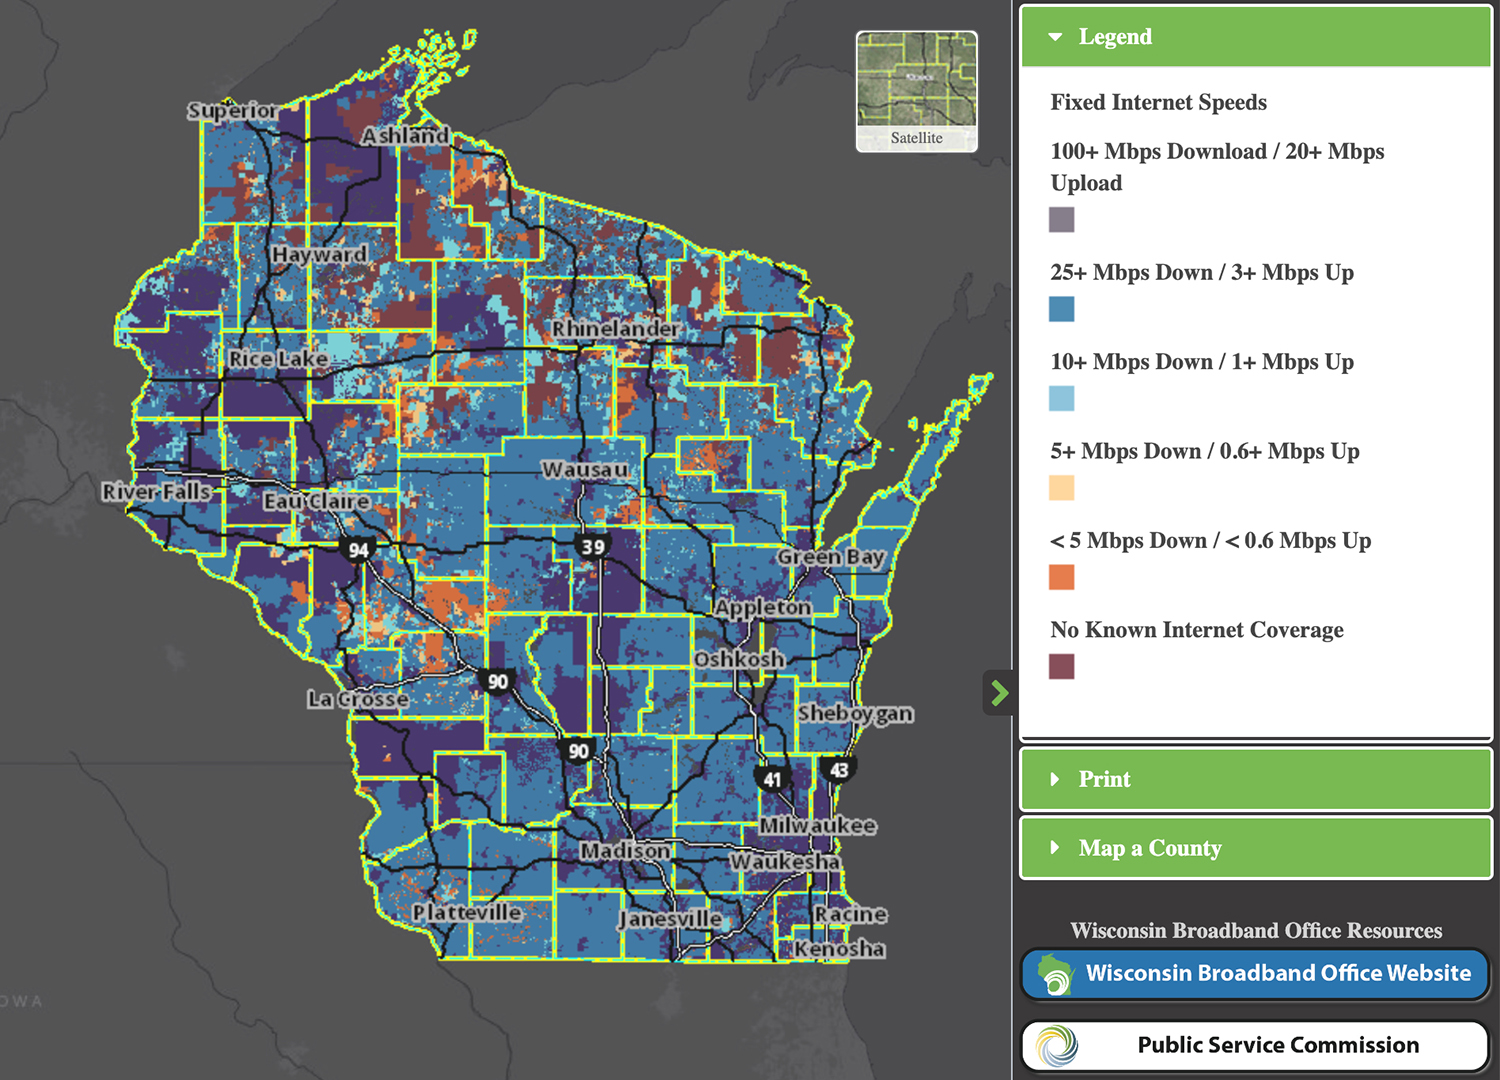 A map of Wisconsin with county outlines shows color-coded fixed internet speeds in different locations around the state.